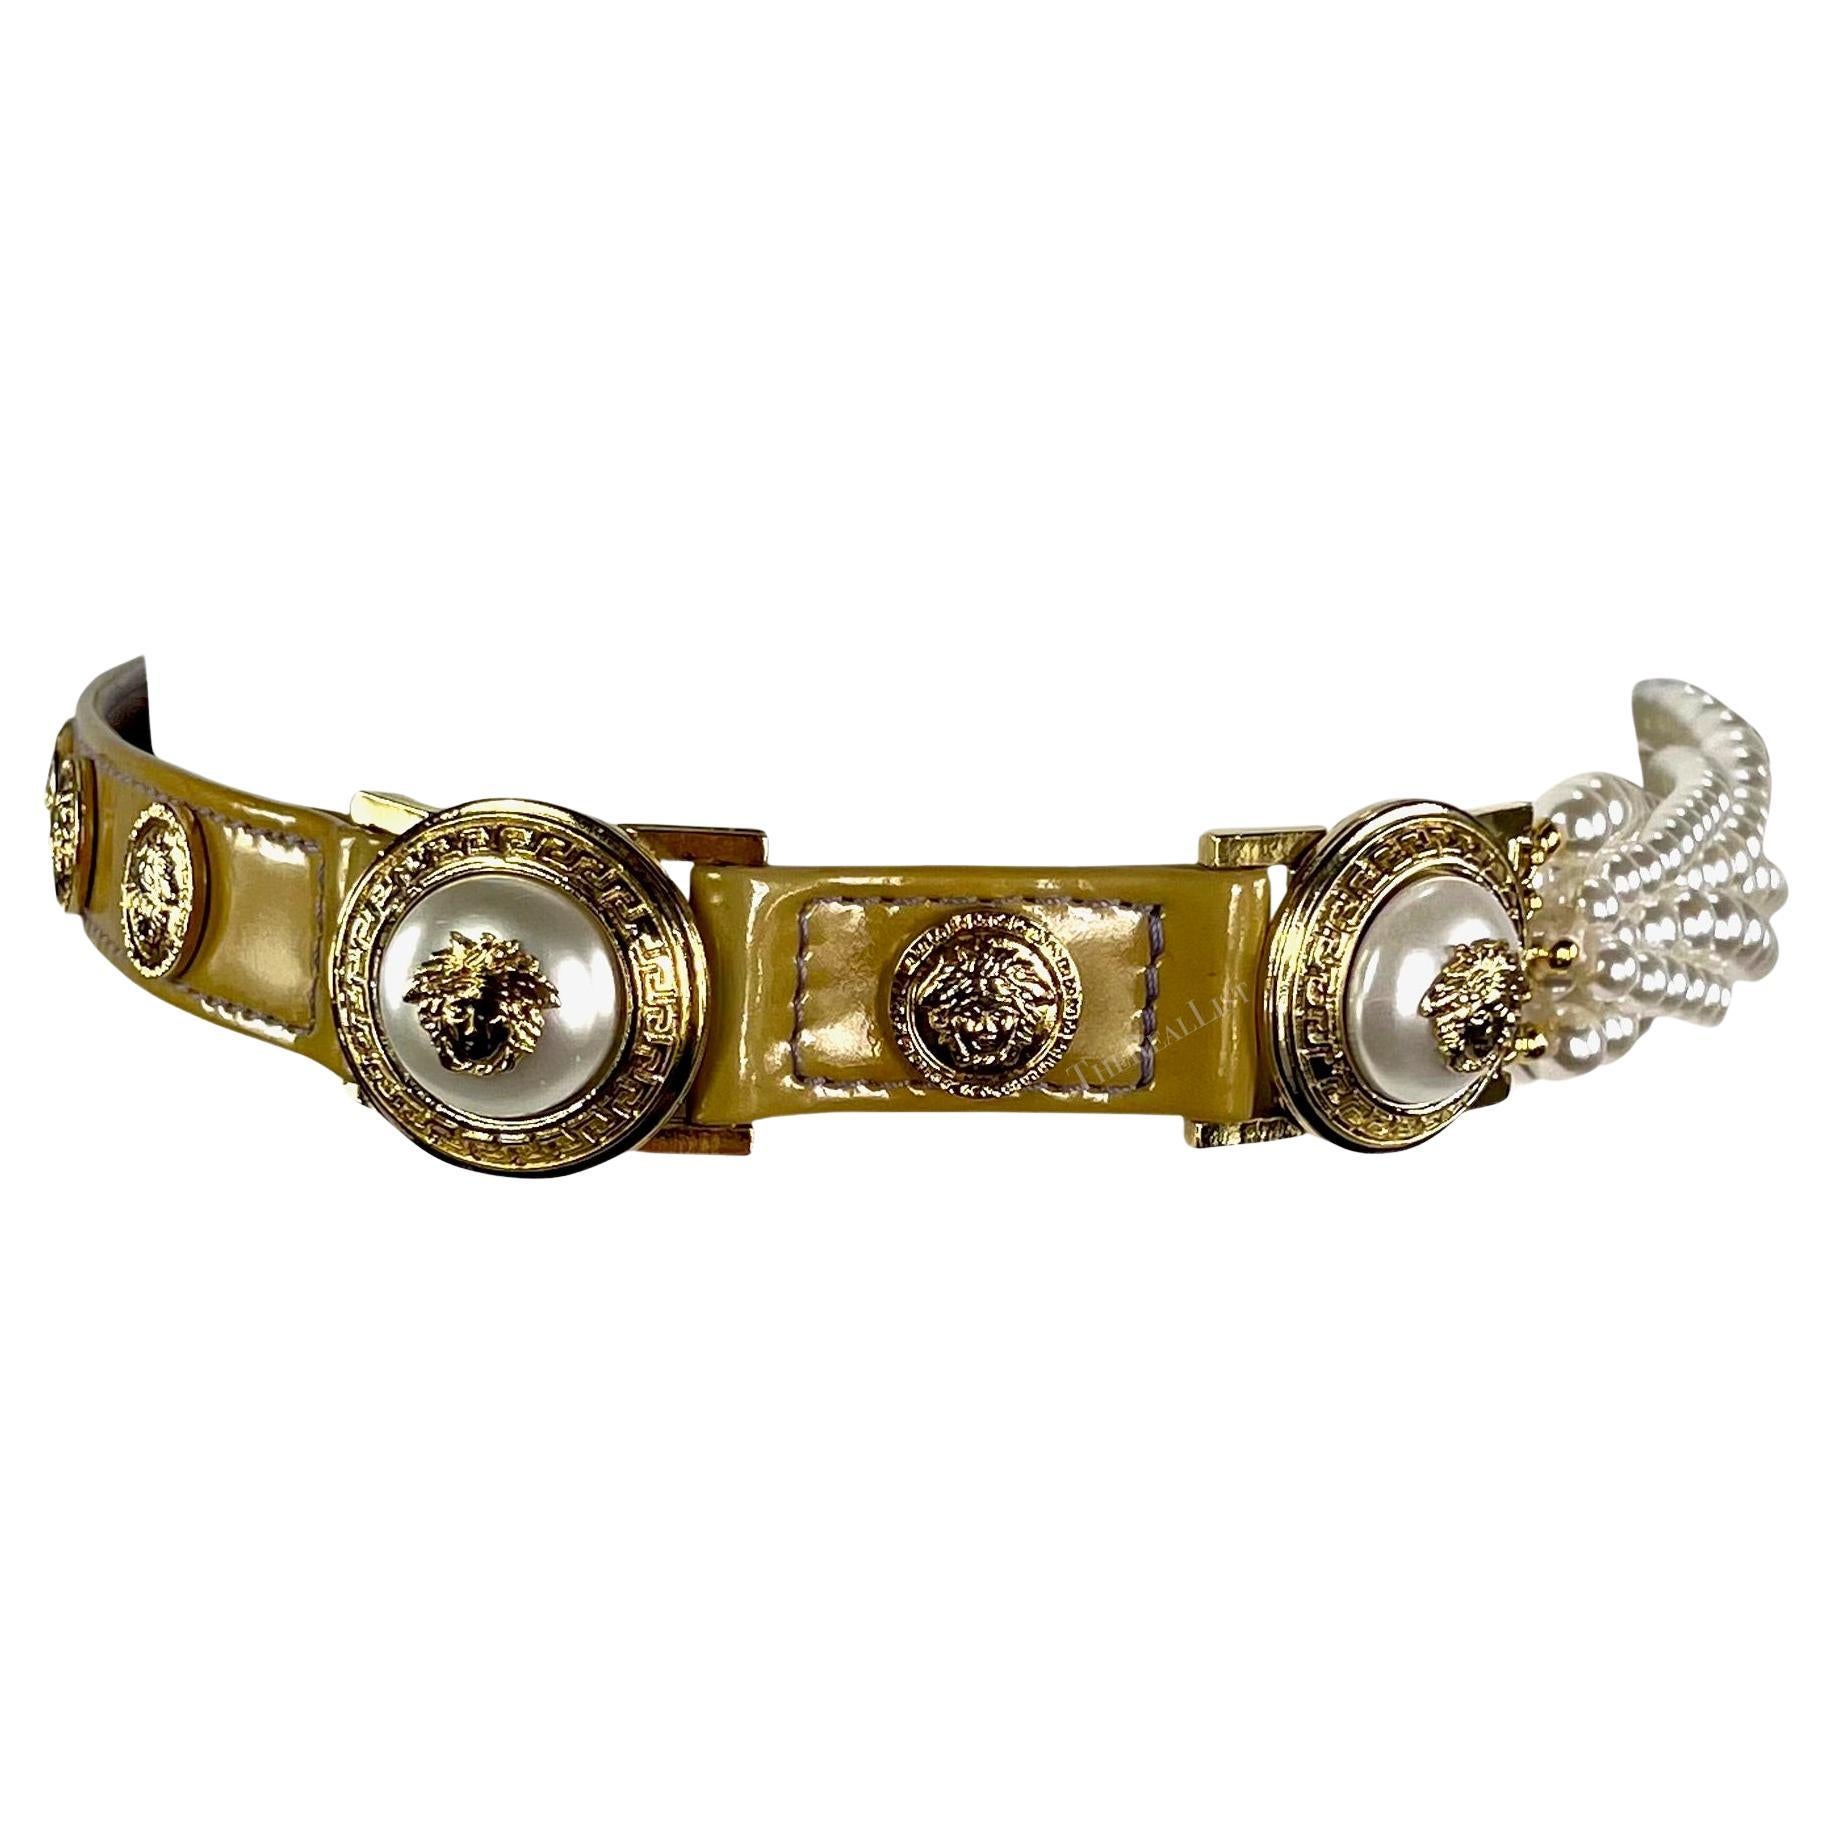 F/W 1994 Gianni Versace Medusa Faux Pearl Patent Leather Belt For Sale 2